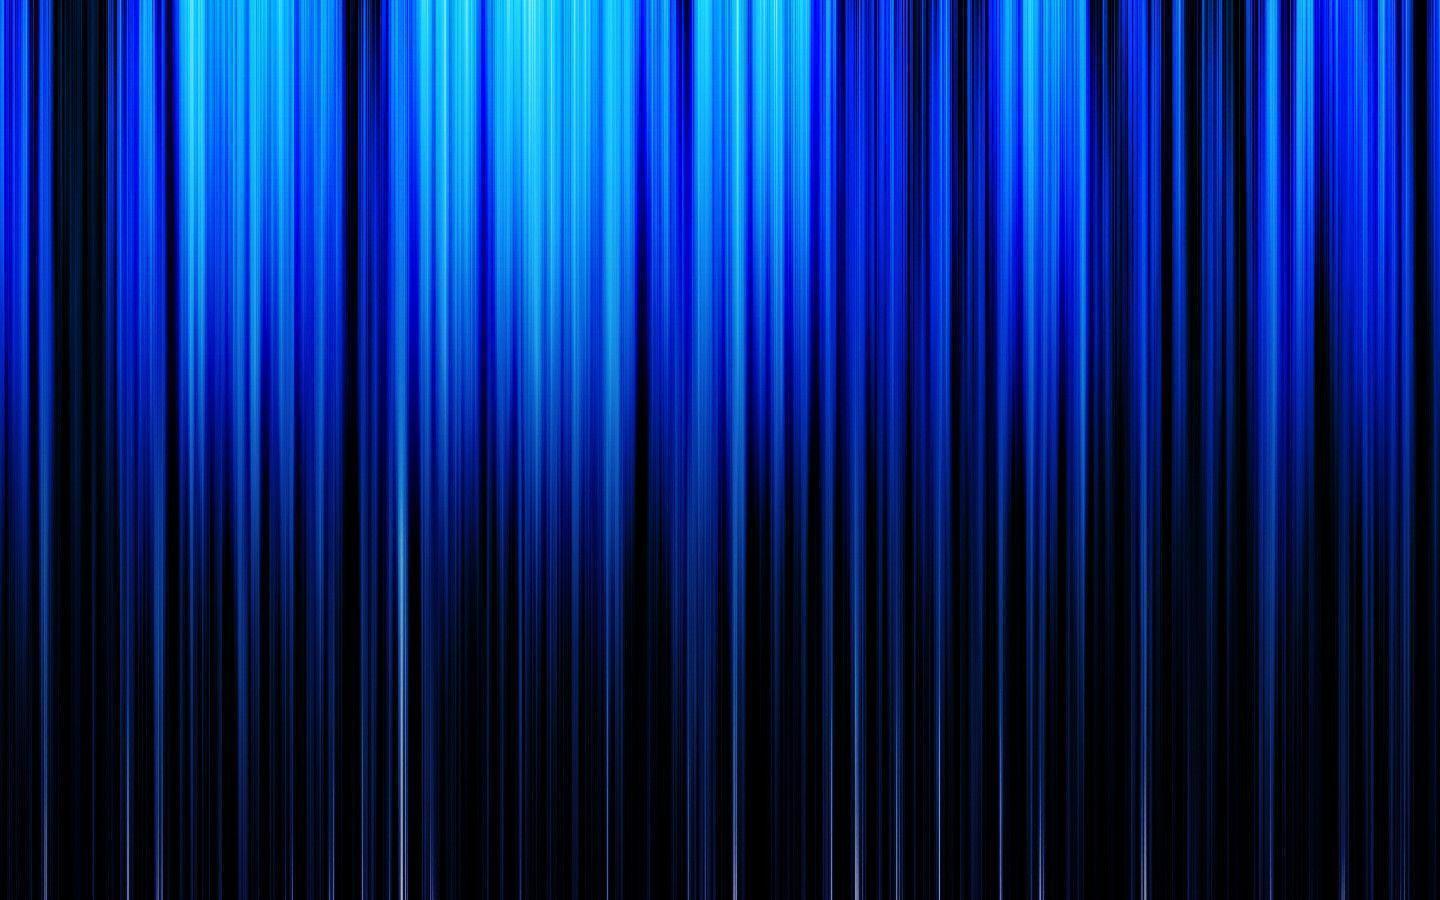 200+] Black And Blue Background s | Wallpapers.com